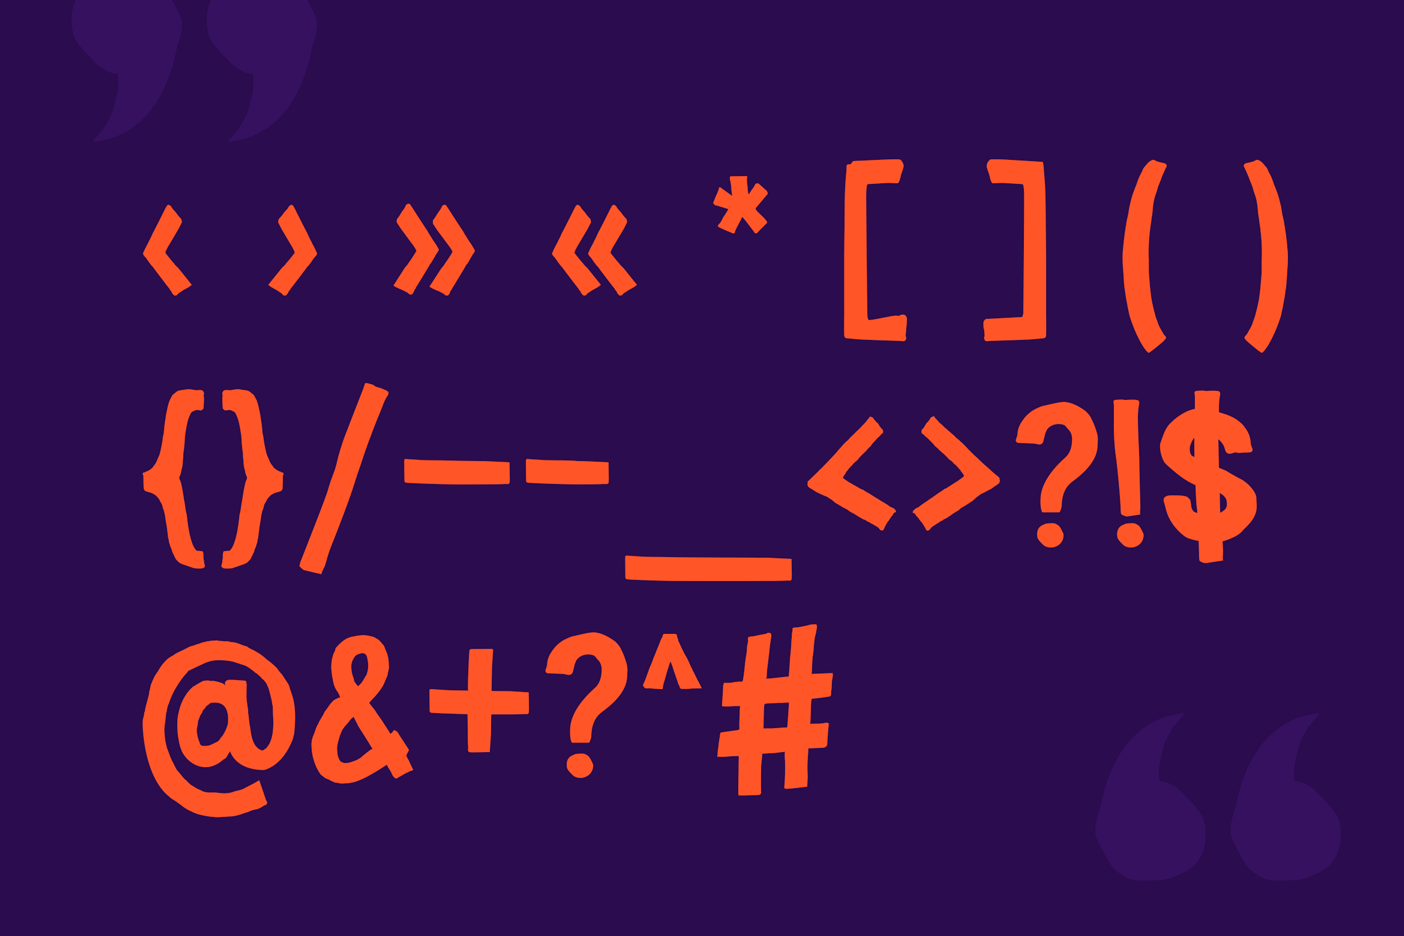 Preview of characters in font style on a purple background.